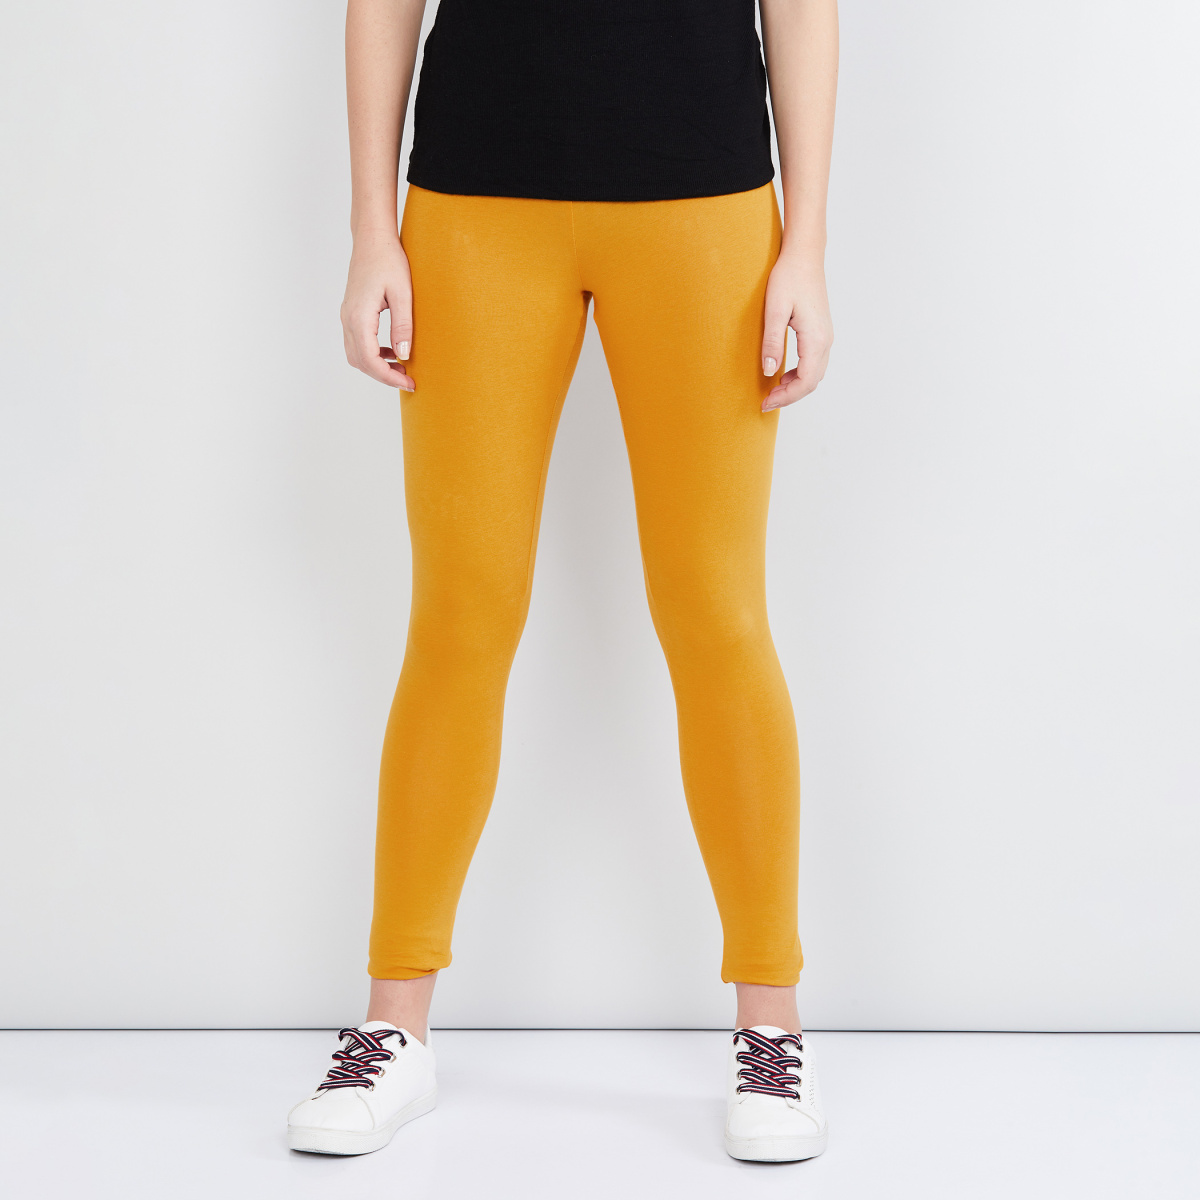 MAX Solid Ankle-Length Leggings, Max, New Town